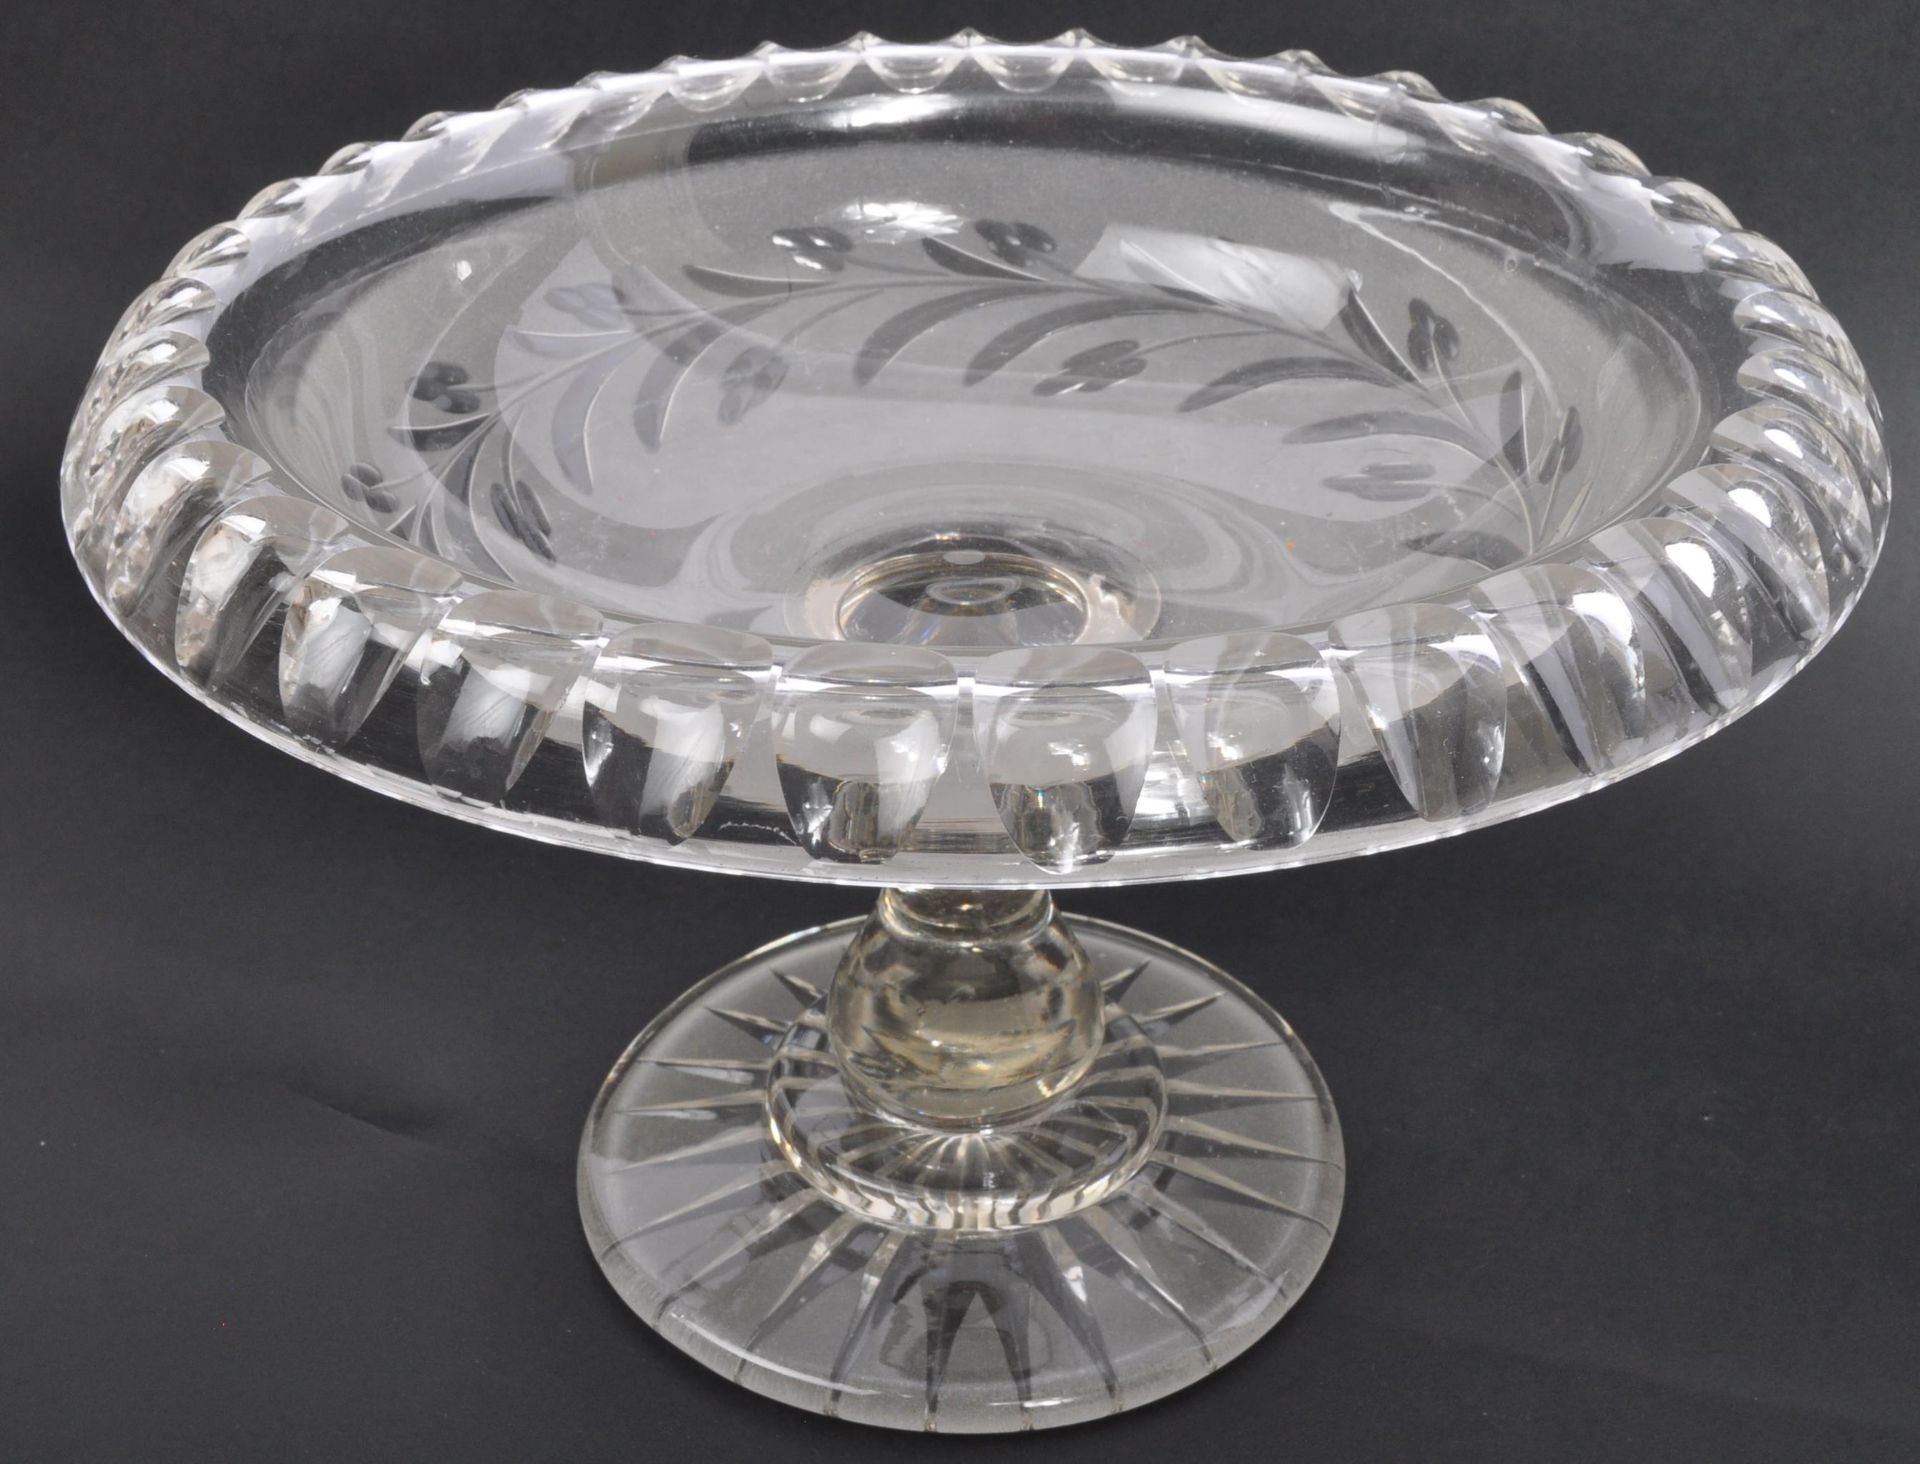 TWO 19TH CENTURY CUT GLASS COMPORTS & SIDE PLATES - Image 5 of 7